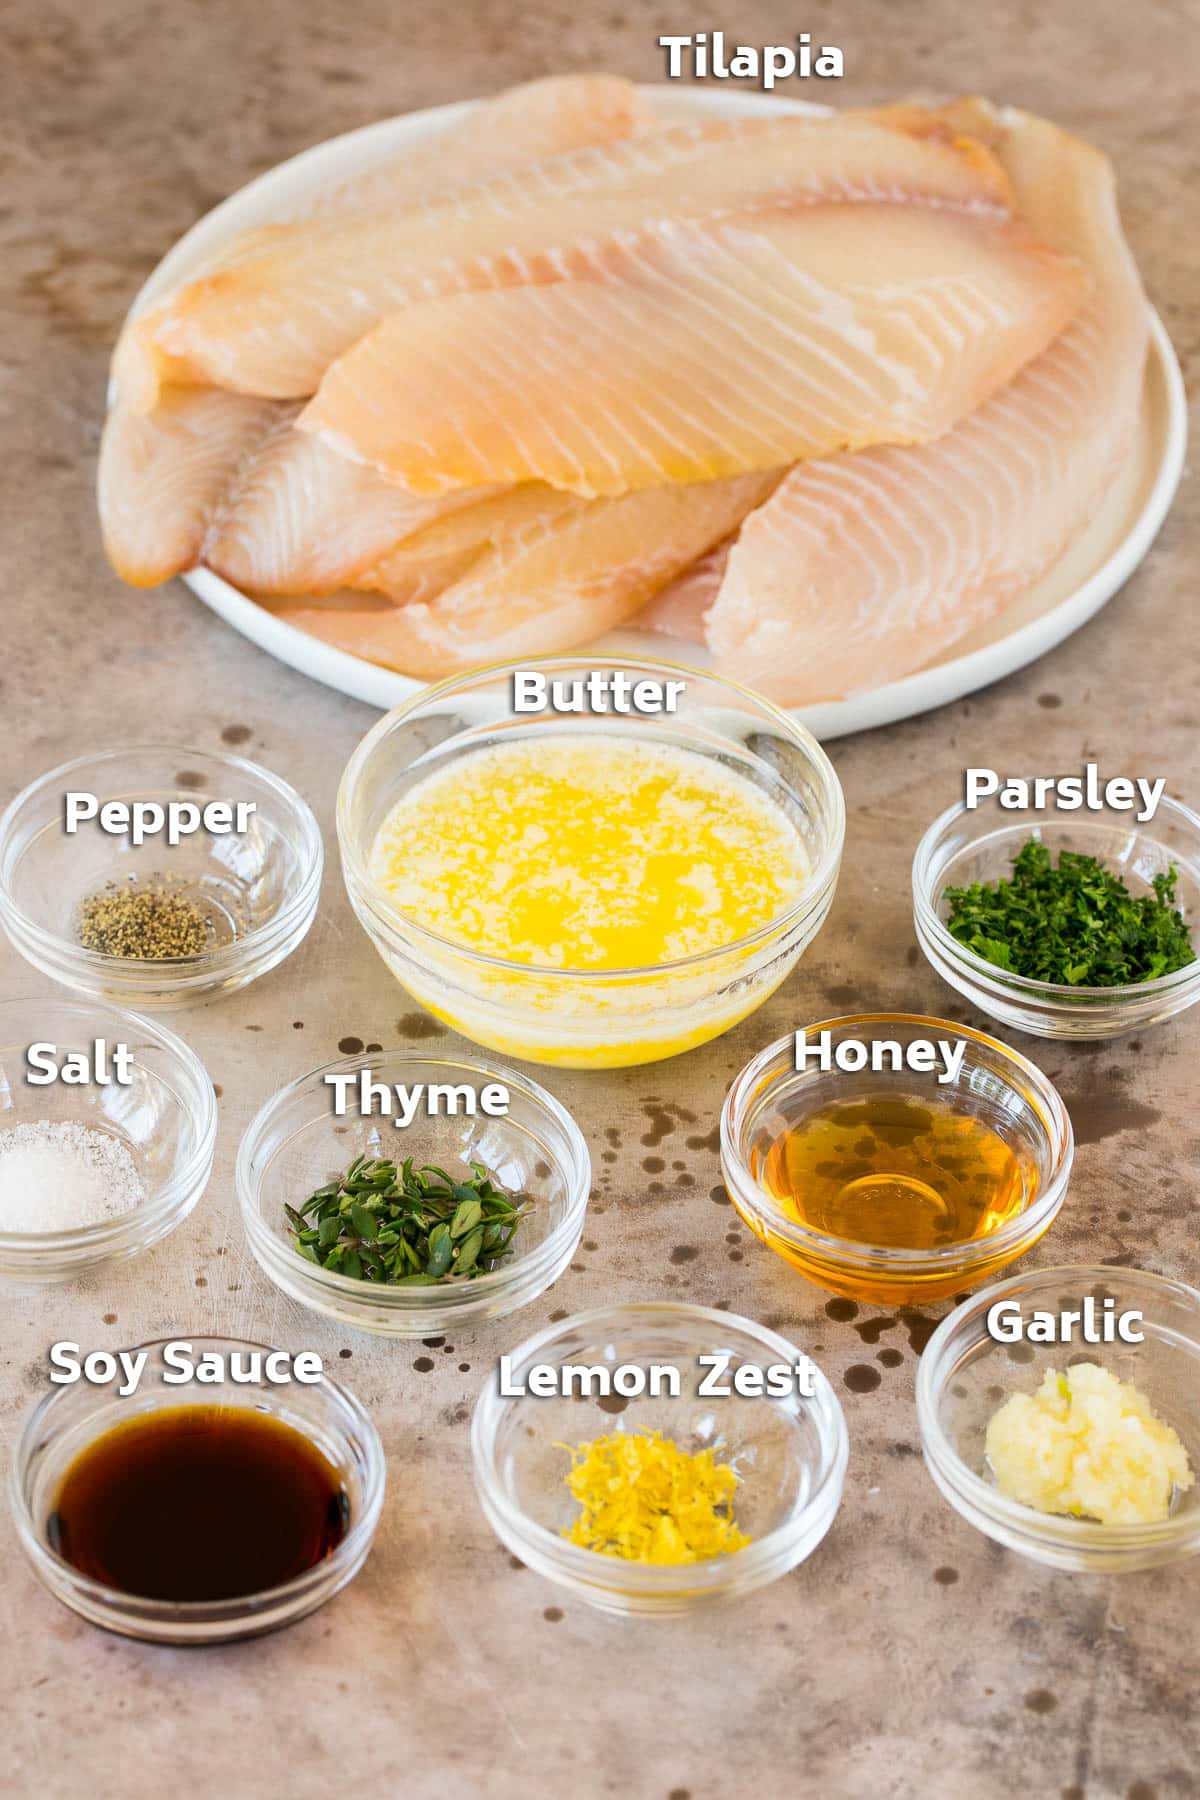 Fresh tilapia fillets with bowls of sauce ingredients including butter, lemon and herbs.